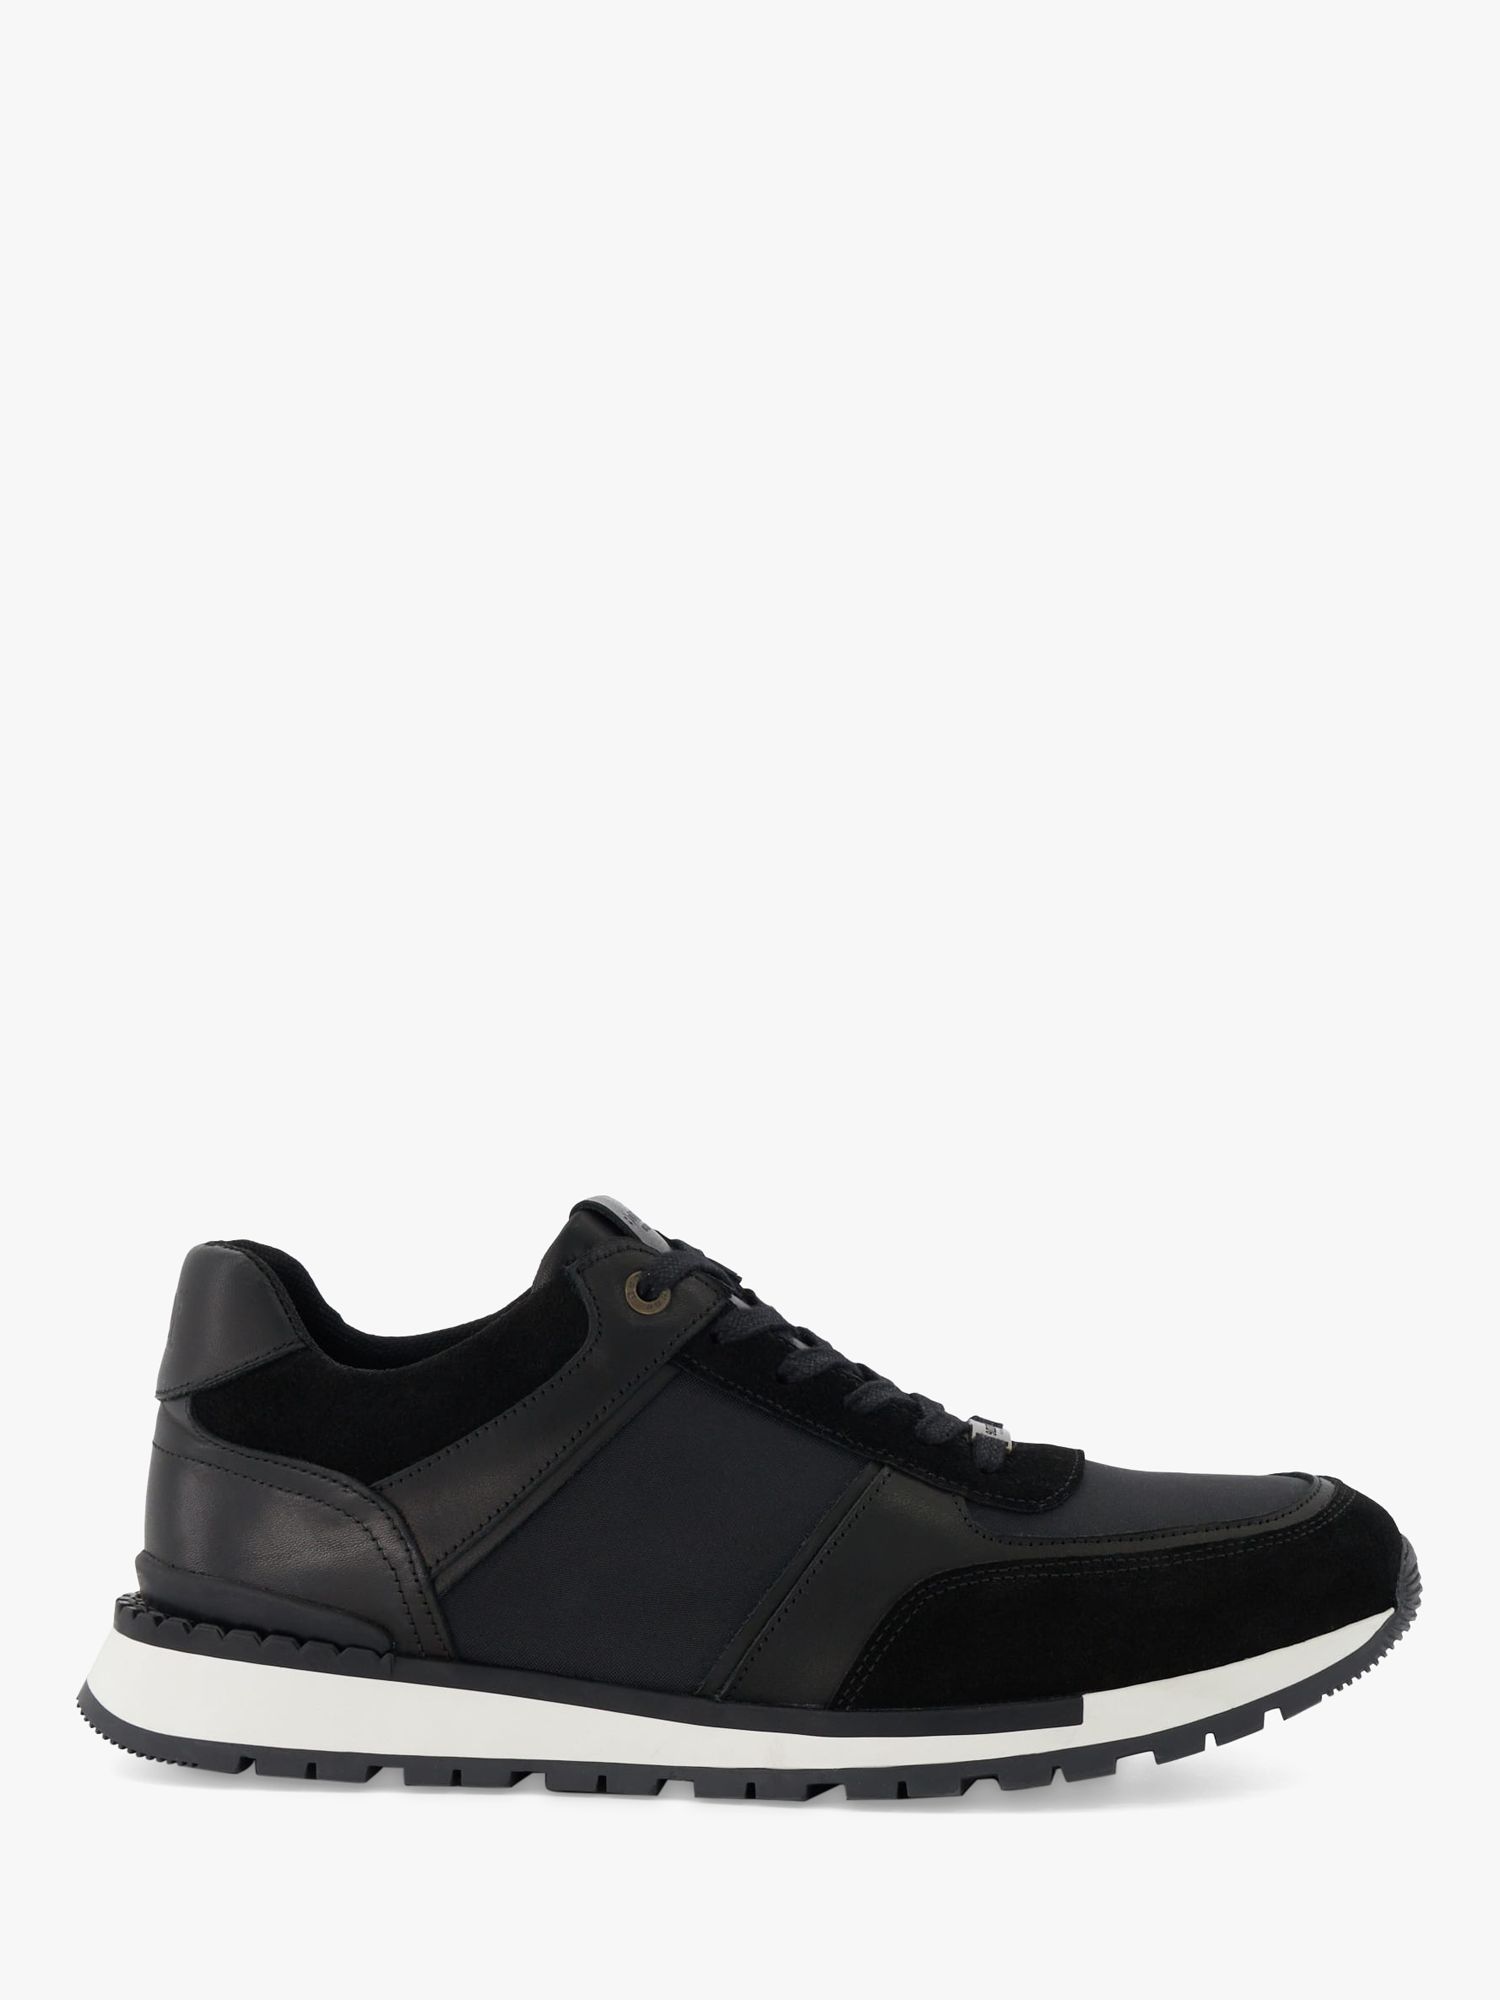 Dune Titles Suede and Leather Trainers, Black at John Lewis & Partners